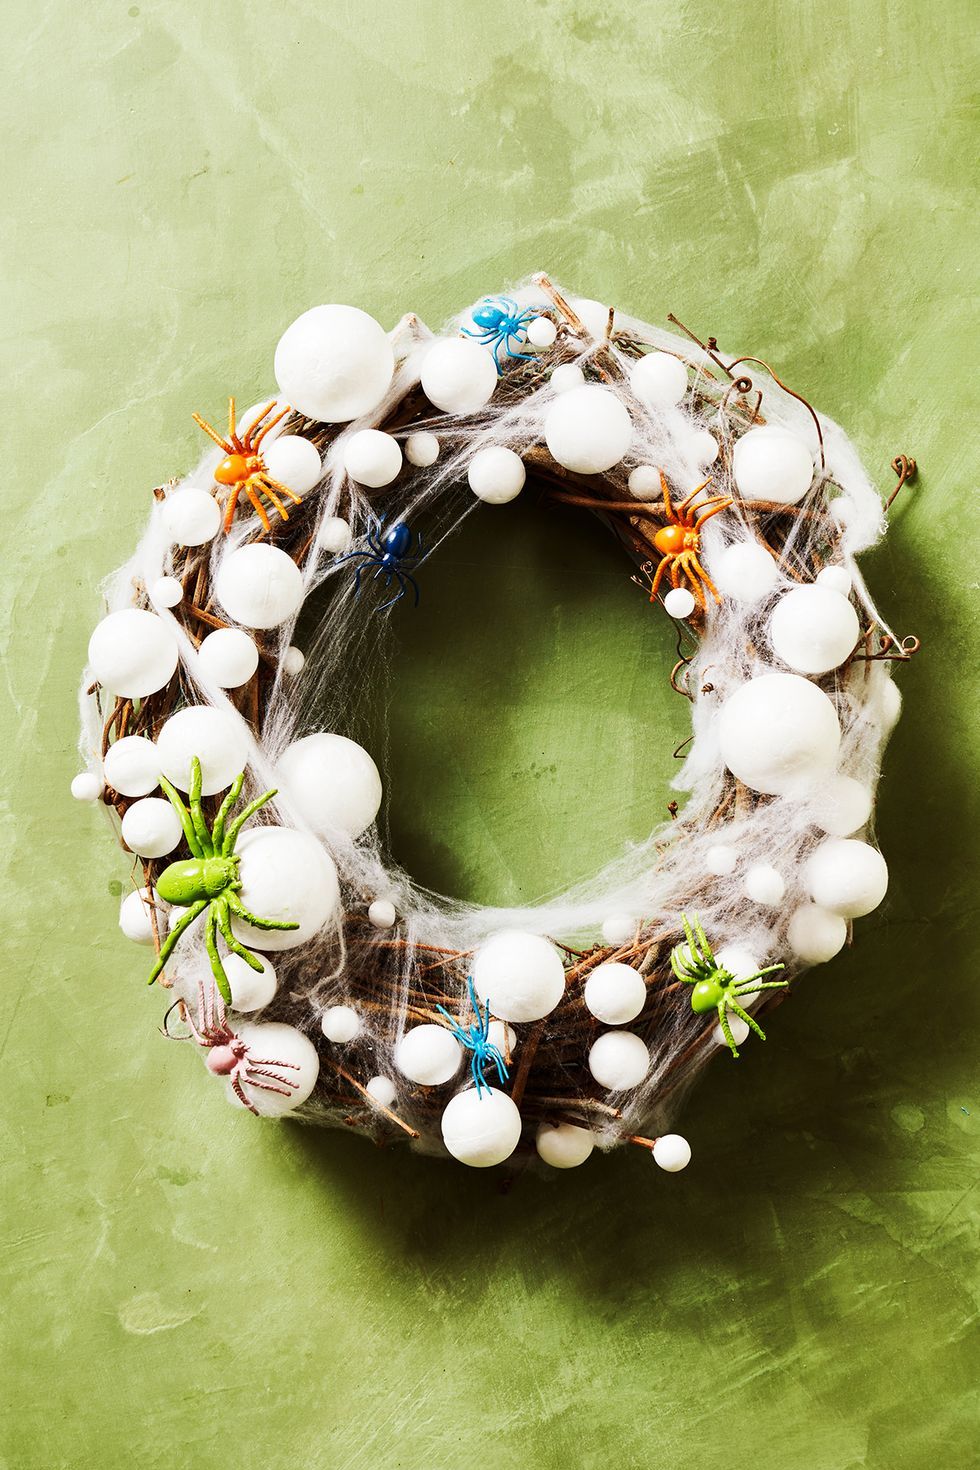 diy outdoor halloween decorations, wreath made with fake spider eggs and web